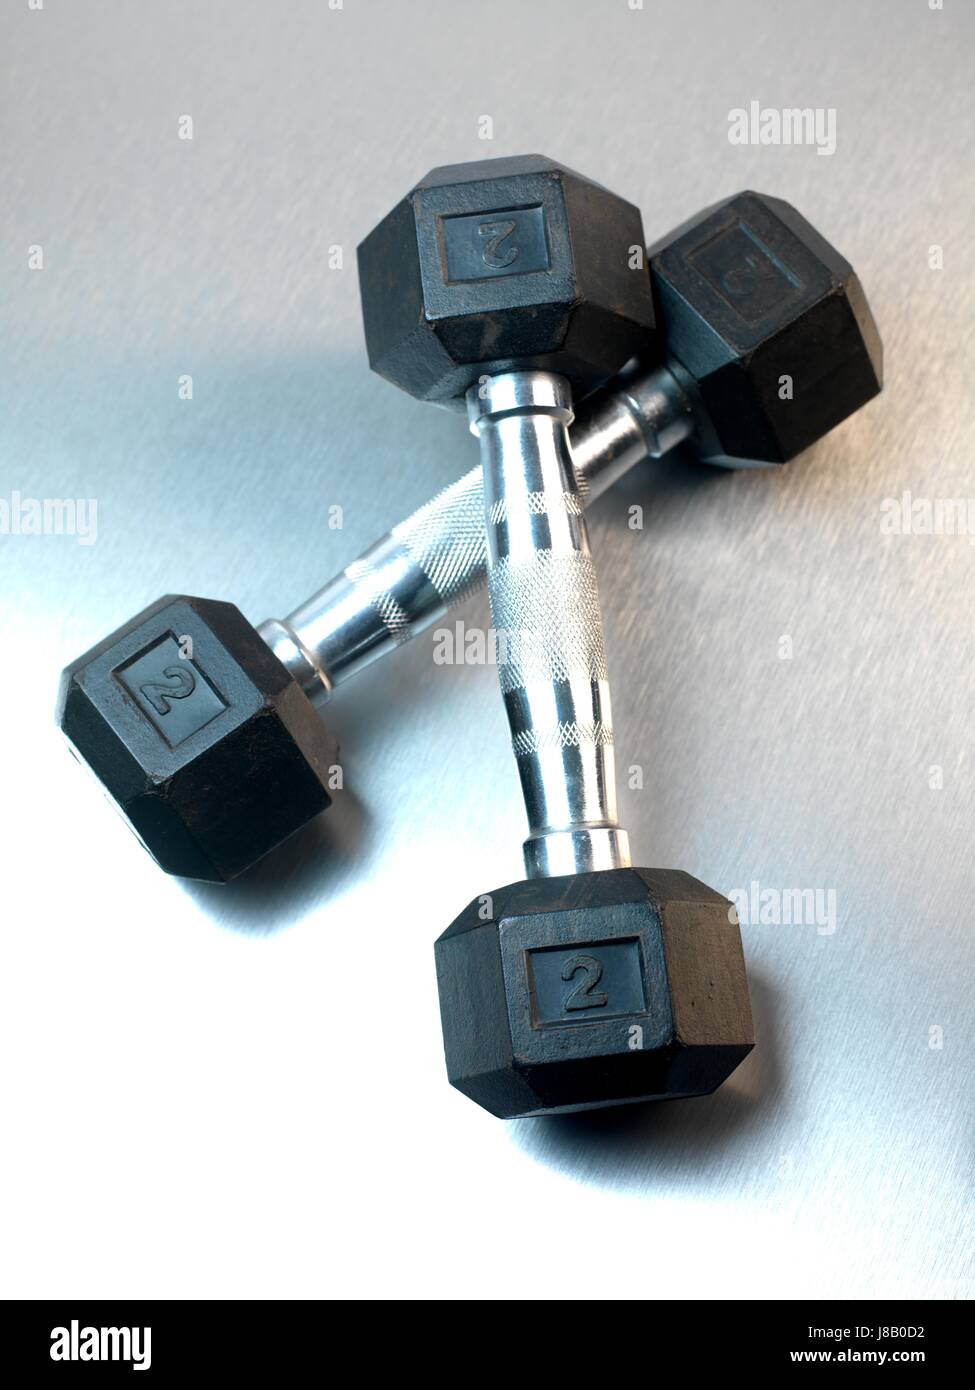 elevator, lift, health, sport, sports, isolated, strong, muscle, loss, spring, Stock Photo